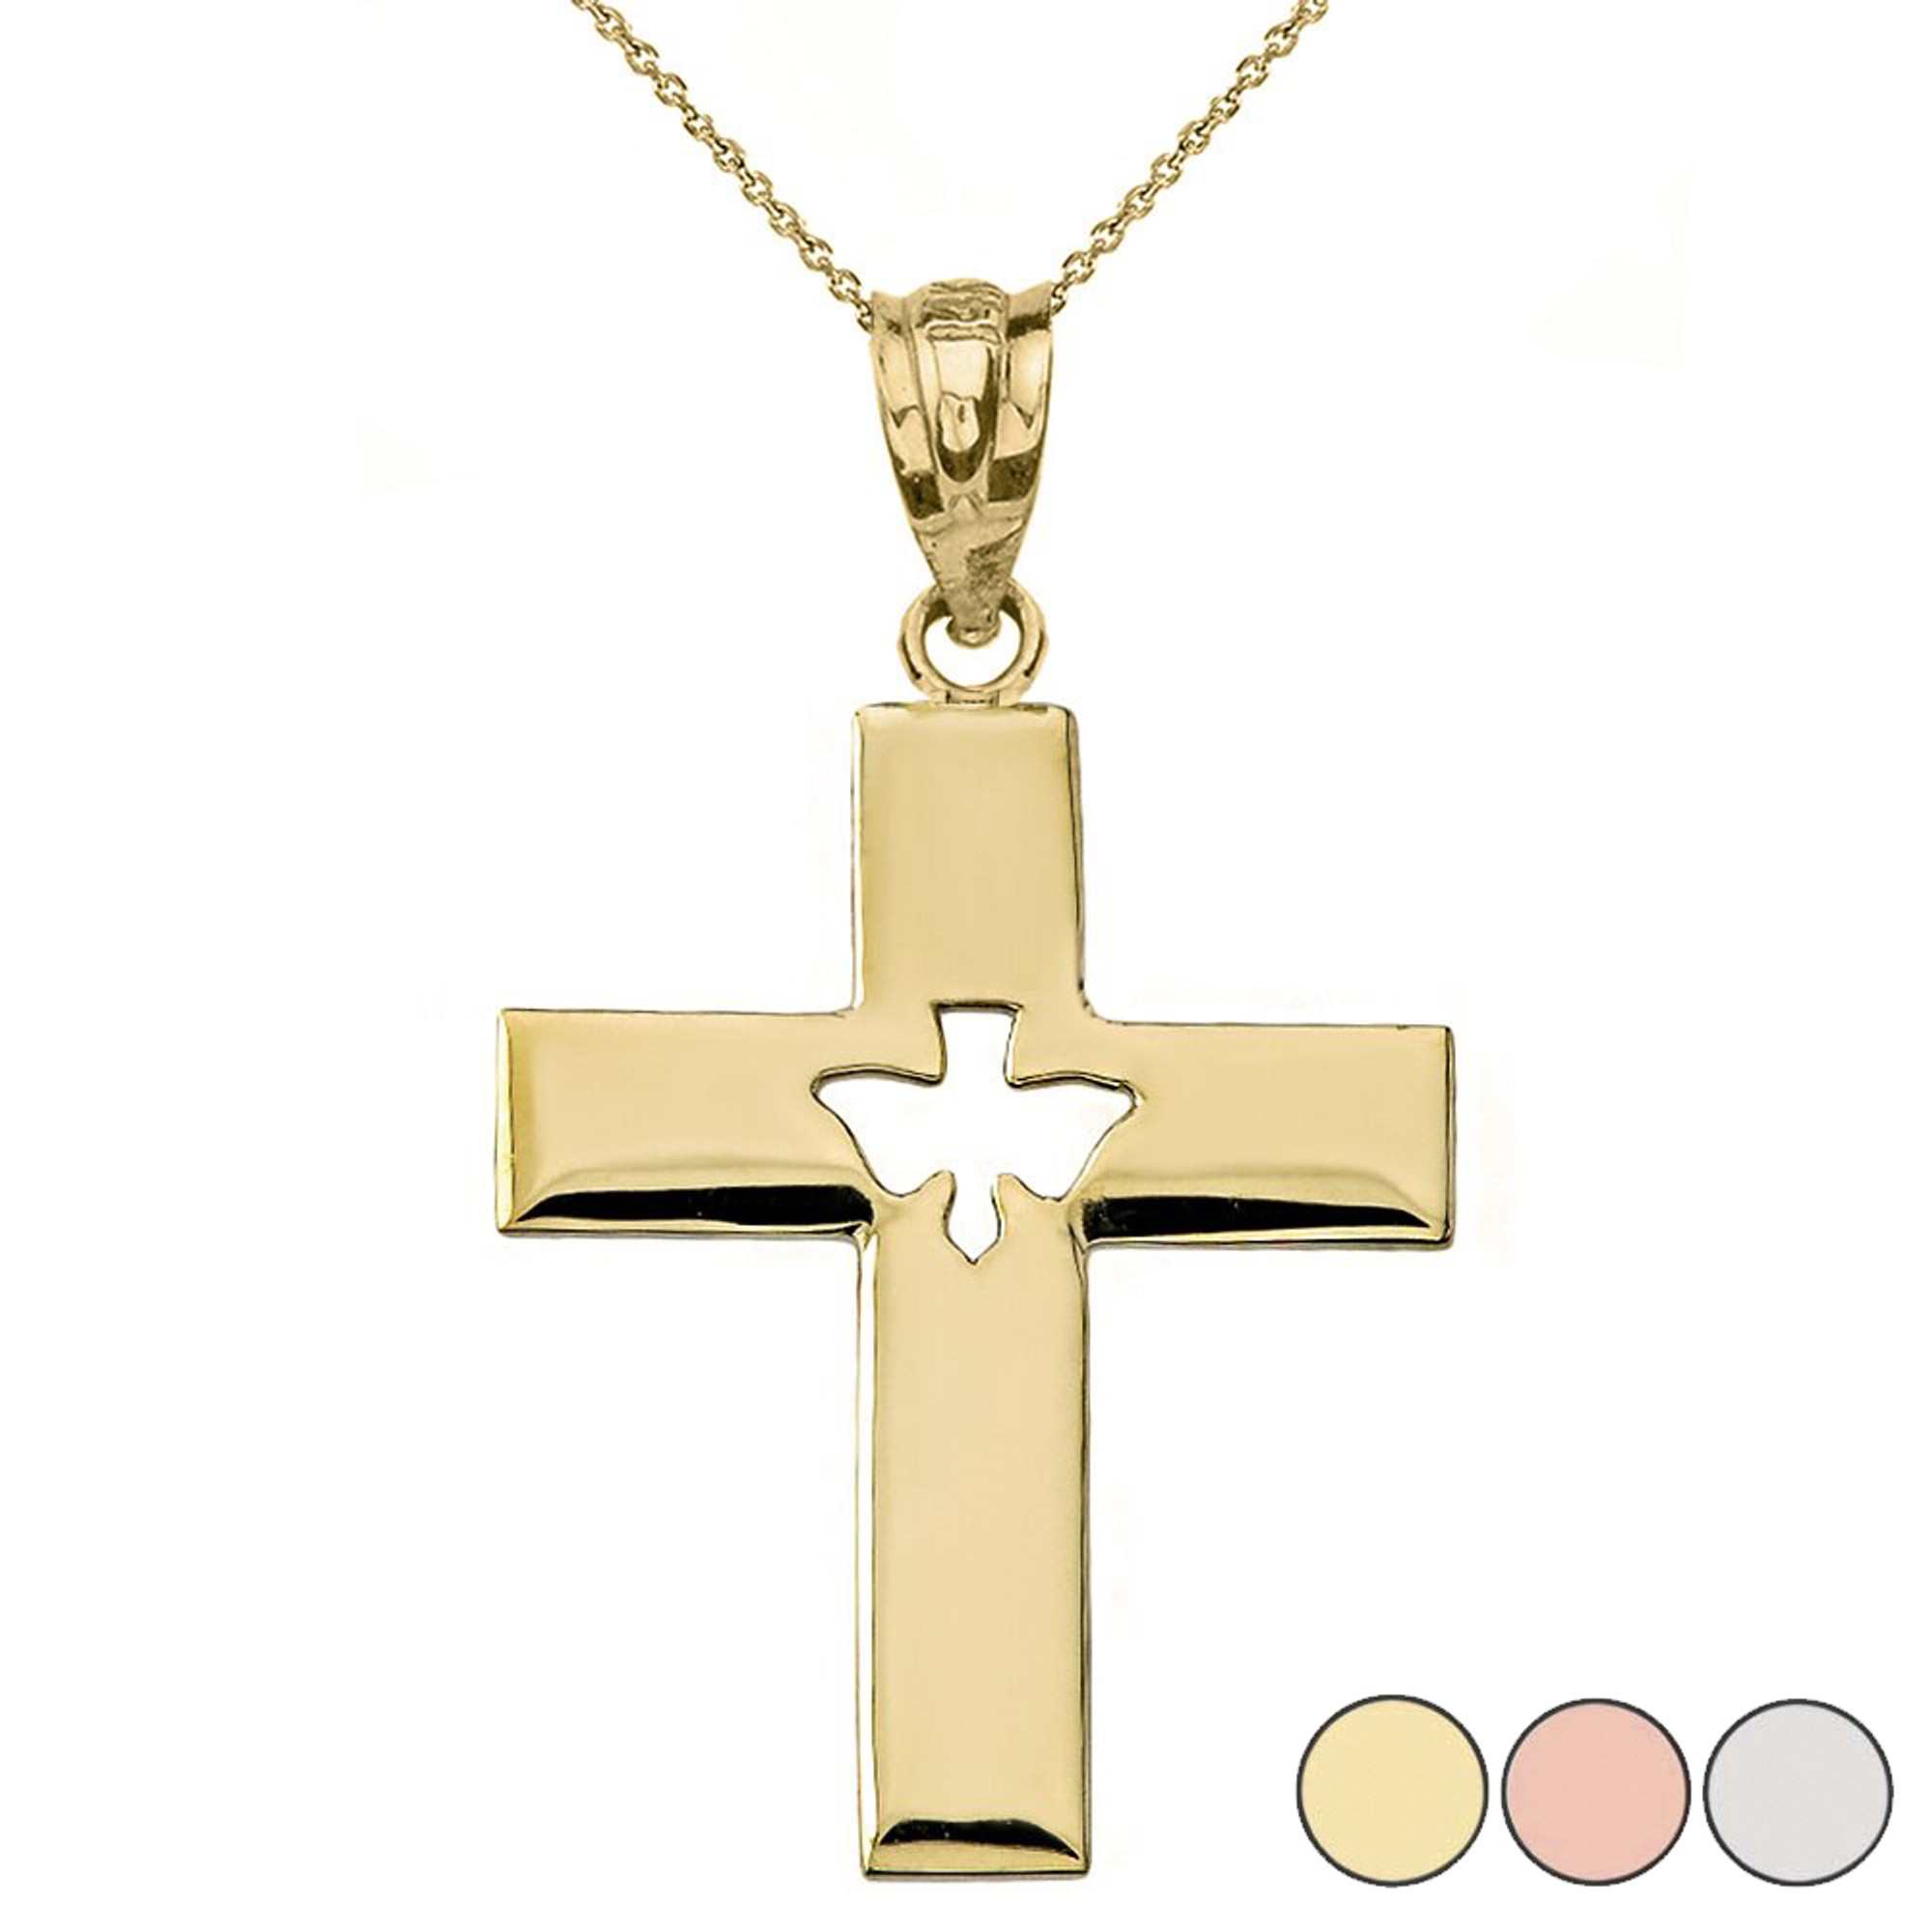 Cross with Dove Holy Spirit Cut Out Pendant Necklace in Gold  (Yellow/Rose/White)